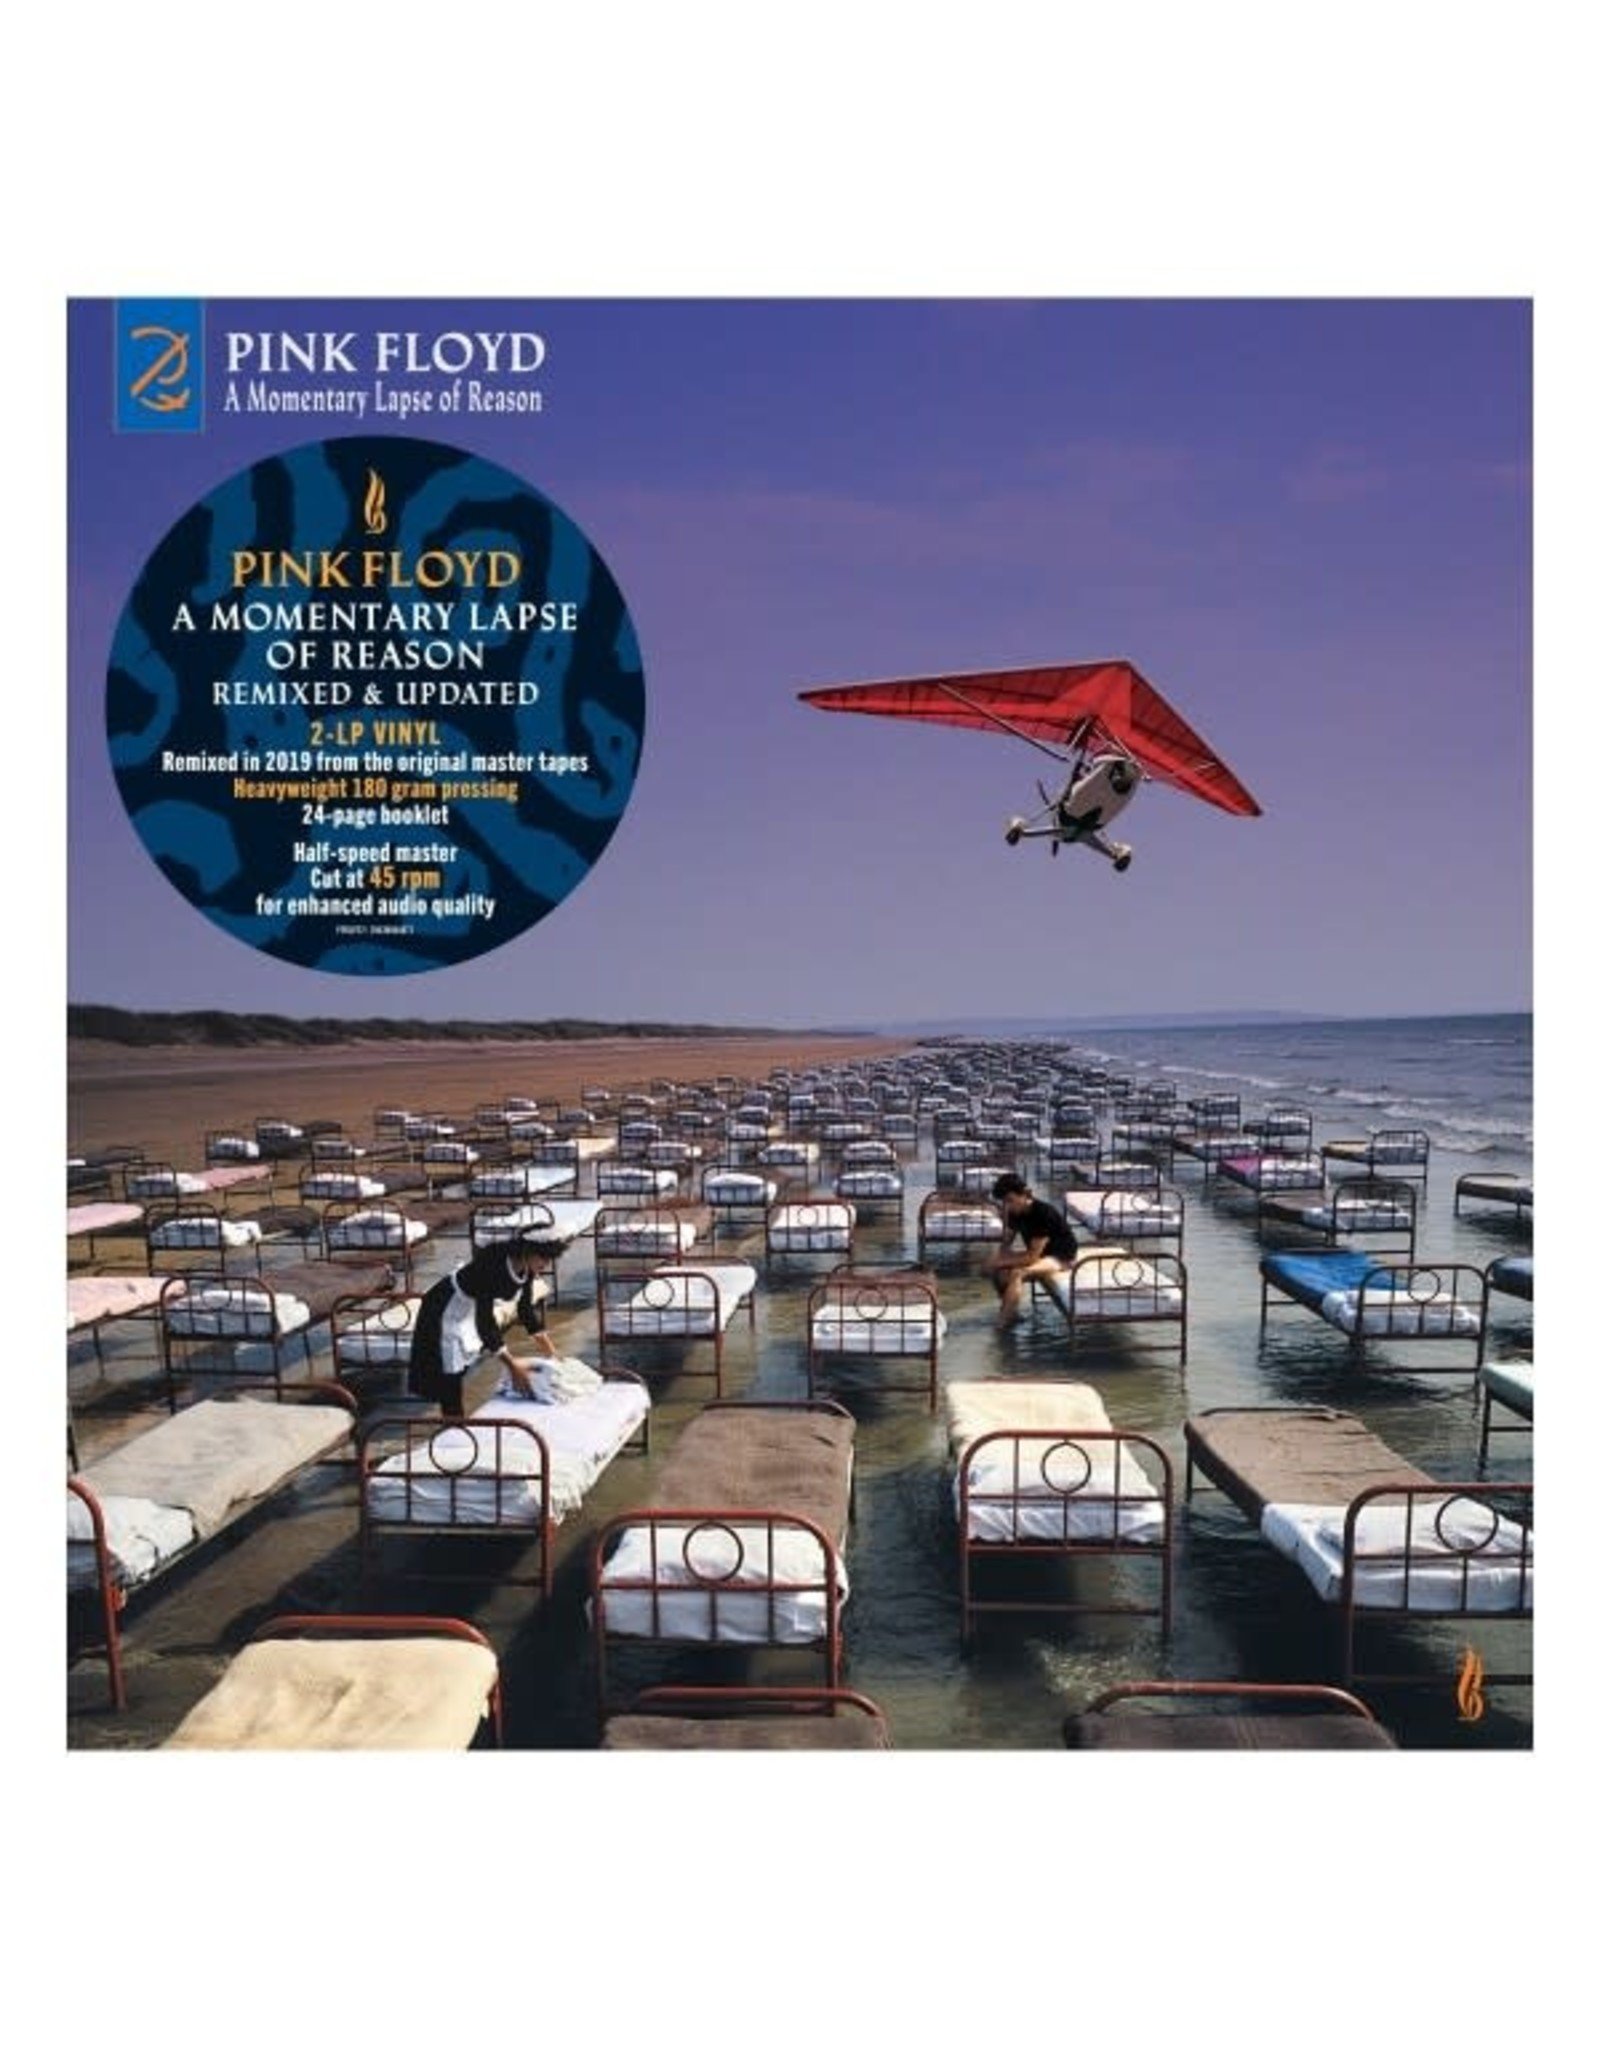 Pink Floyd - A Momentary Lapse of Reason 2LP (Half Speed Master)